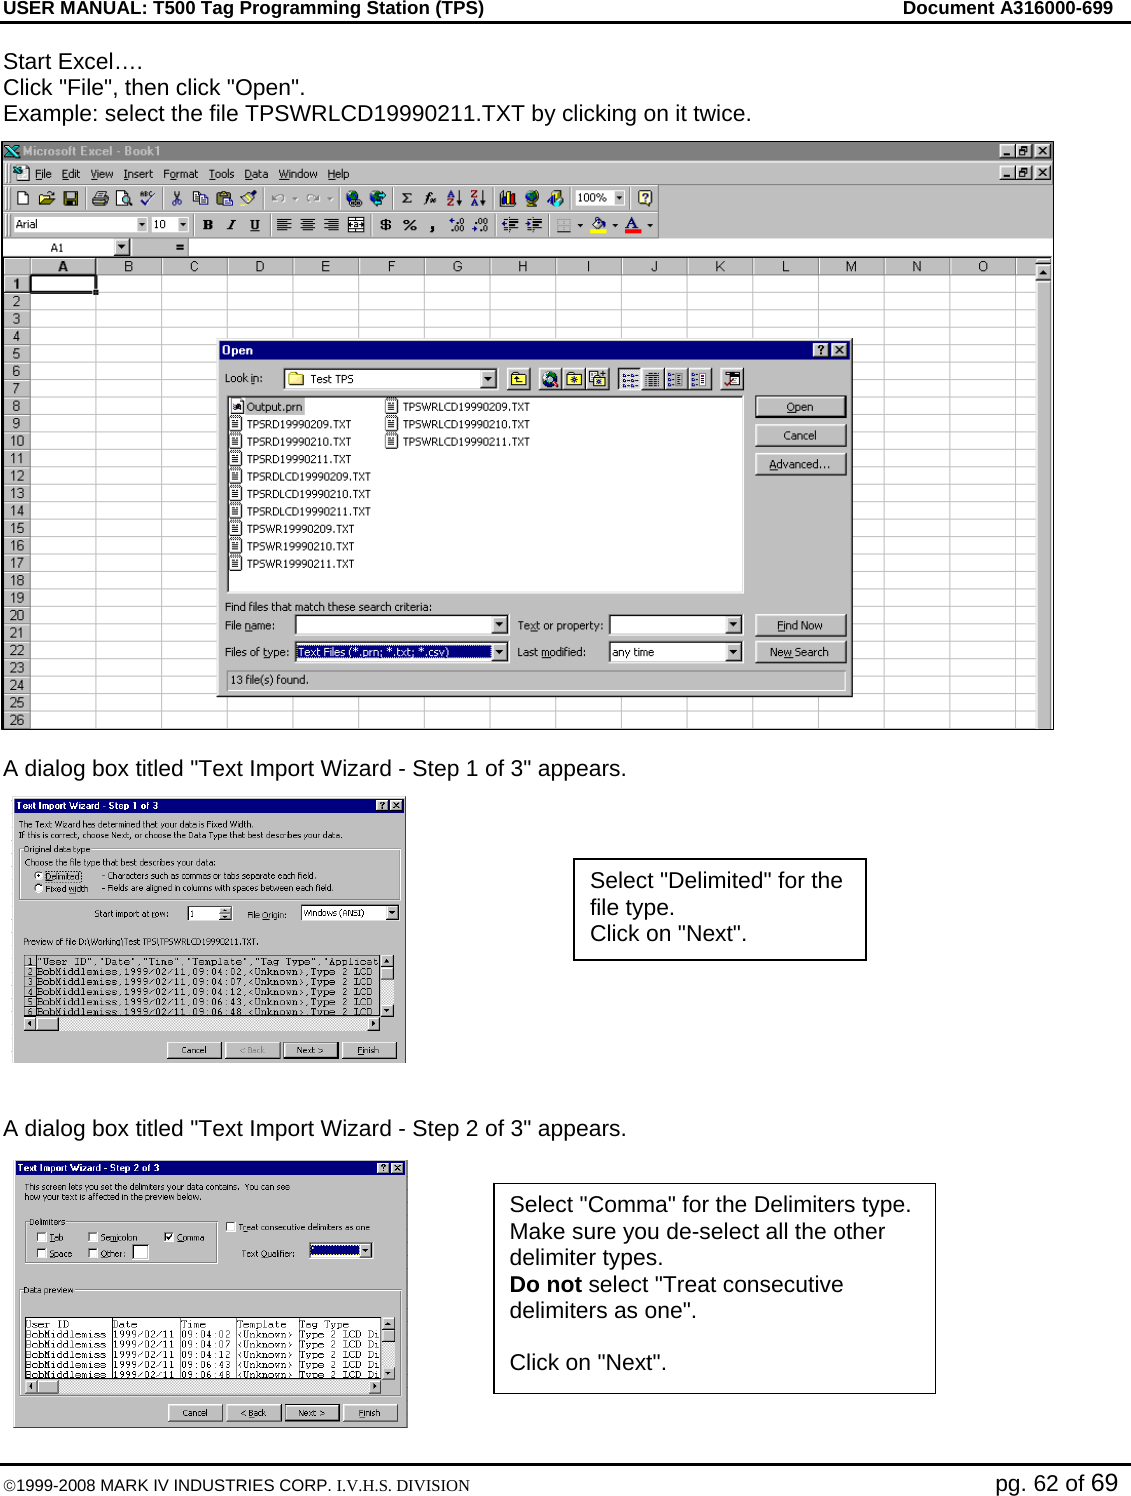 USER MANUAL: T500 Tag Programming Station (TPS)     Document A316000-699  ©1999-2008 MARK IV INDUSTRIES CORP. I.V.H.S. DIVISION   pg. 62 of 69 Start Excel…. Click &quot;File&quot;, then click &quot;Open&quot;. Example: select the file TPSWRLCD19990211.TXT by clicking on it twice.  A dialog box titled &quot;Text Import Wizard - Step 1 of 3&quot; appears.   A dialog box titled &quot;Text Import Wizard - Step 2 of 3&quot; appears.  Select &quot;Delimited&quot; for the file type. Click on &quot;Next&quot;. Select &quot;Comma&quot; for the Delimiters type. Make sure you de-select all the other delimiter types. Do not select &quot;Treat consecutive delimiters as one&quot;.  Click on &quot;Next&quot;. 